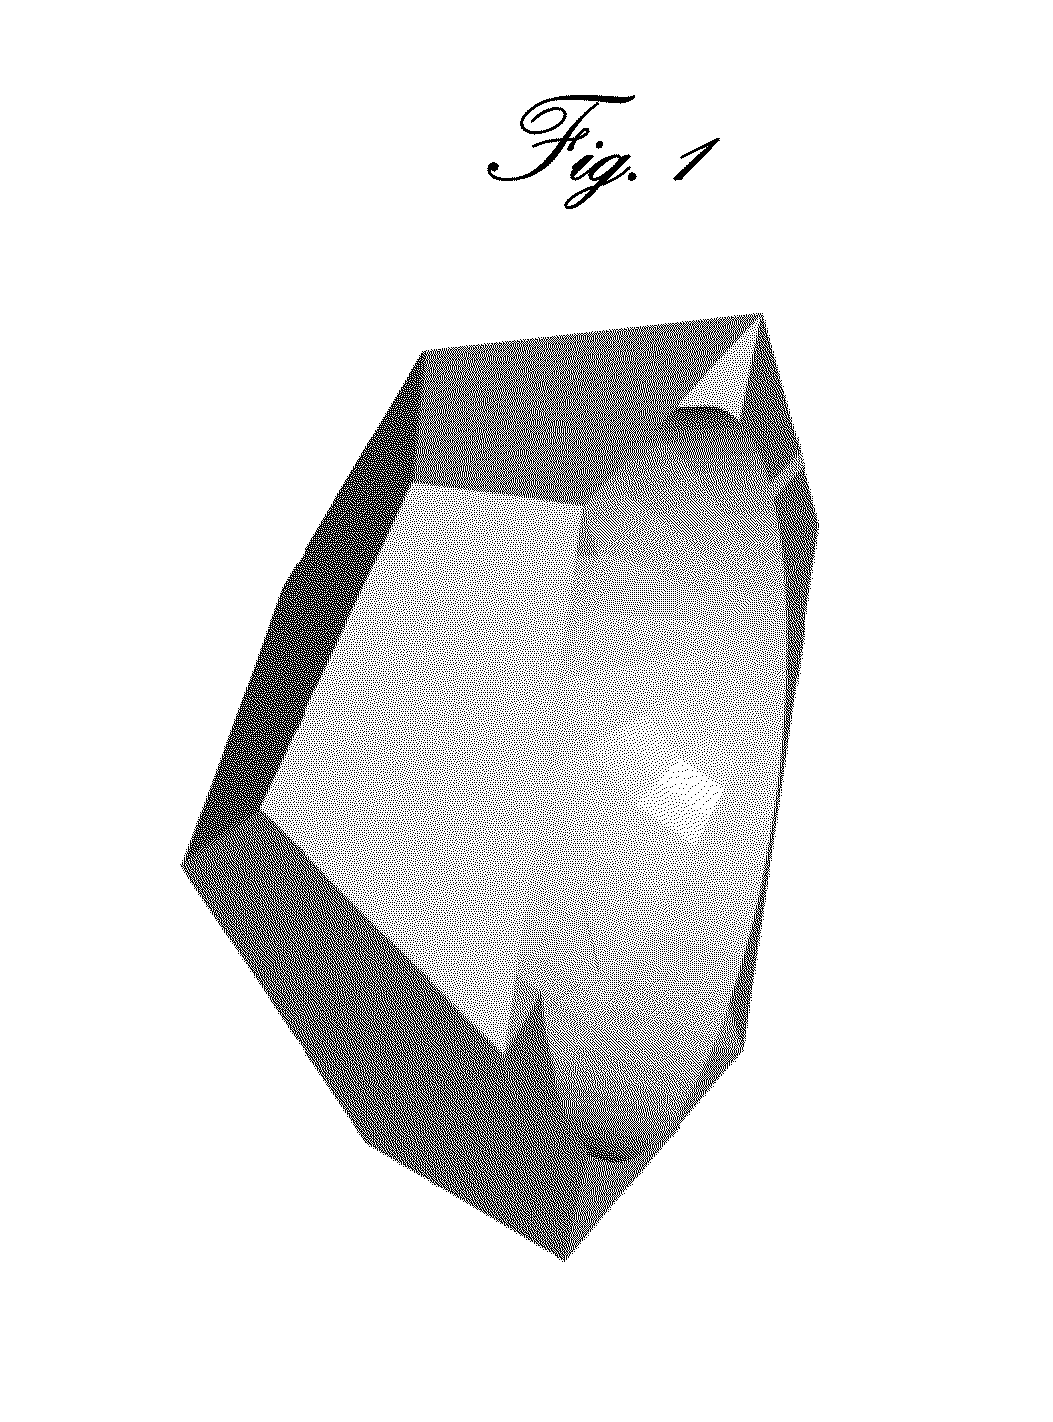 Inorganic structures with controlled open cell porosity and articles made therefrom